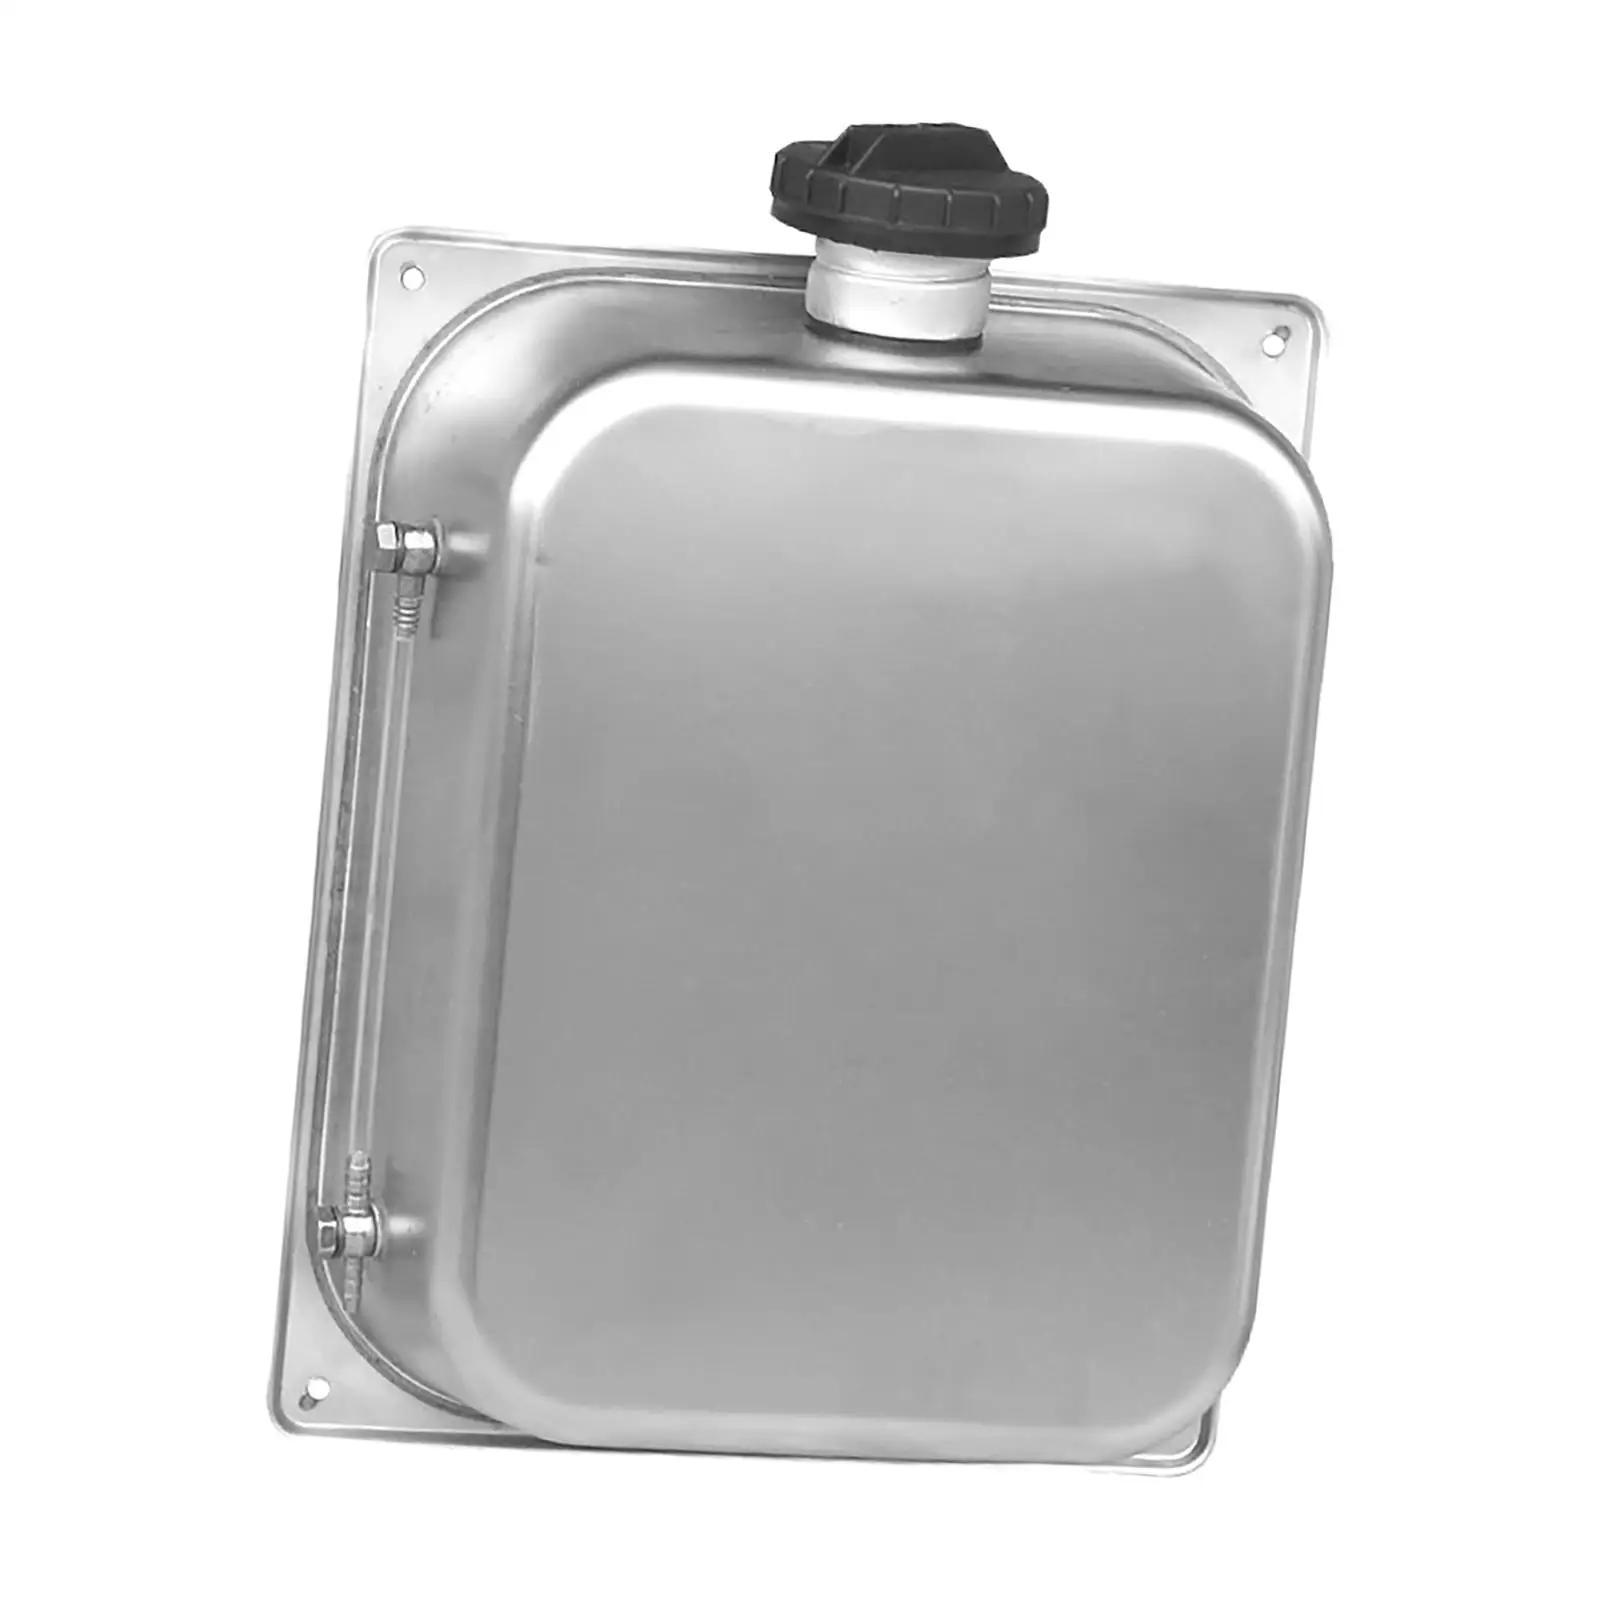 1.85 Gallon Fuel Tank Emergency Backup Petrol Tanks Container with Guide Pipe Stainless Steel Fuel Can for Most Cars SUV